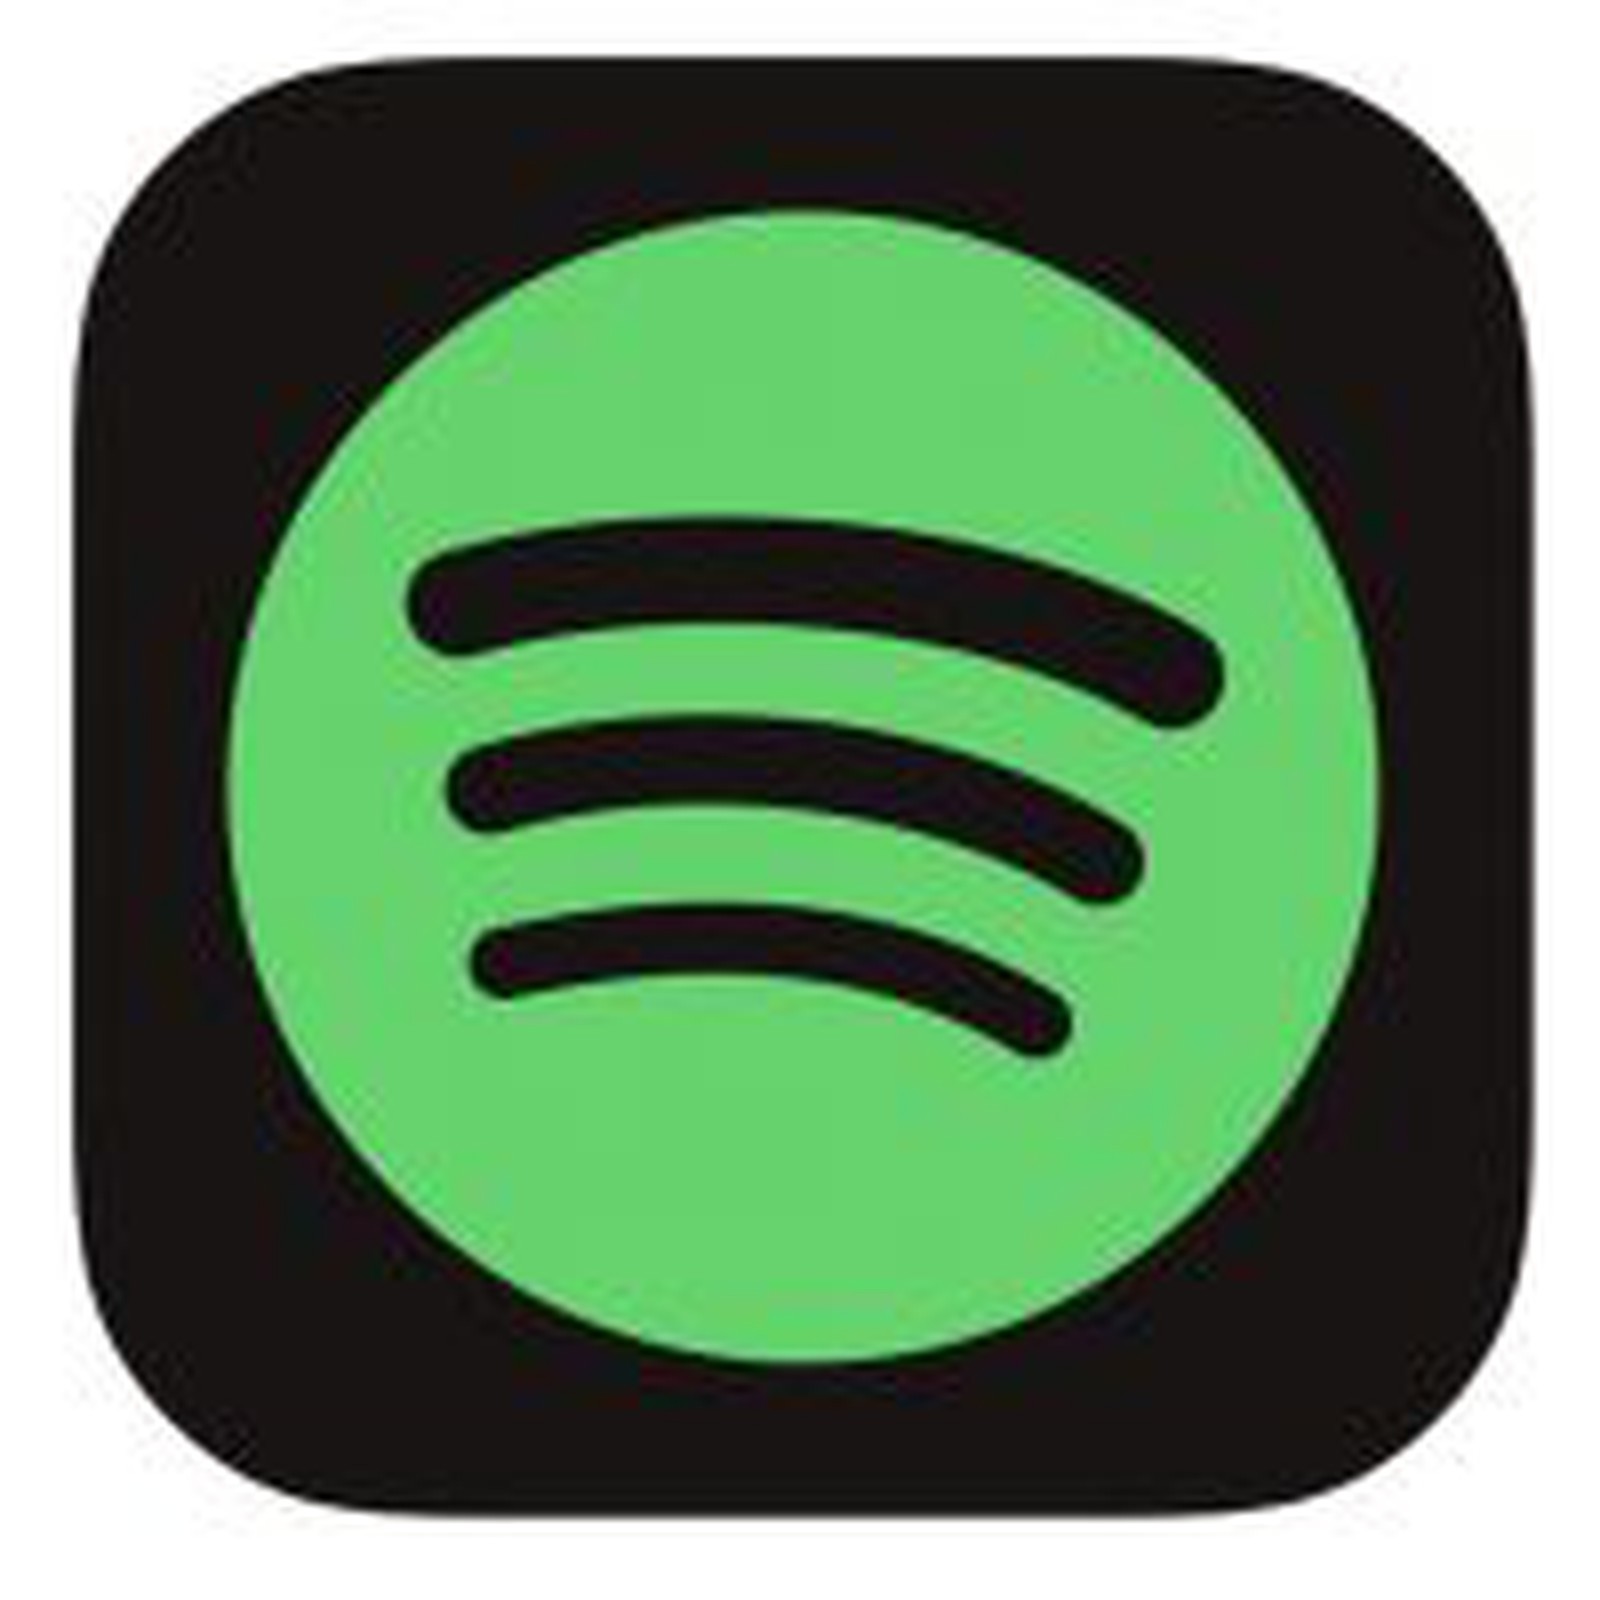 spotify app for pc free download